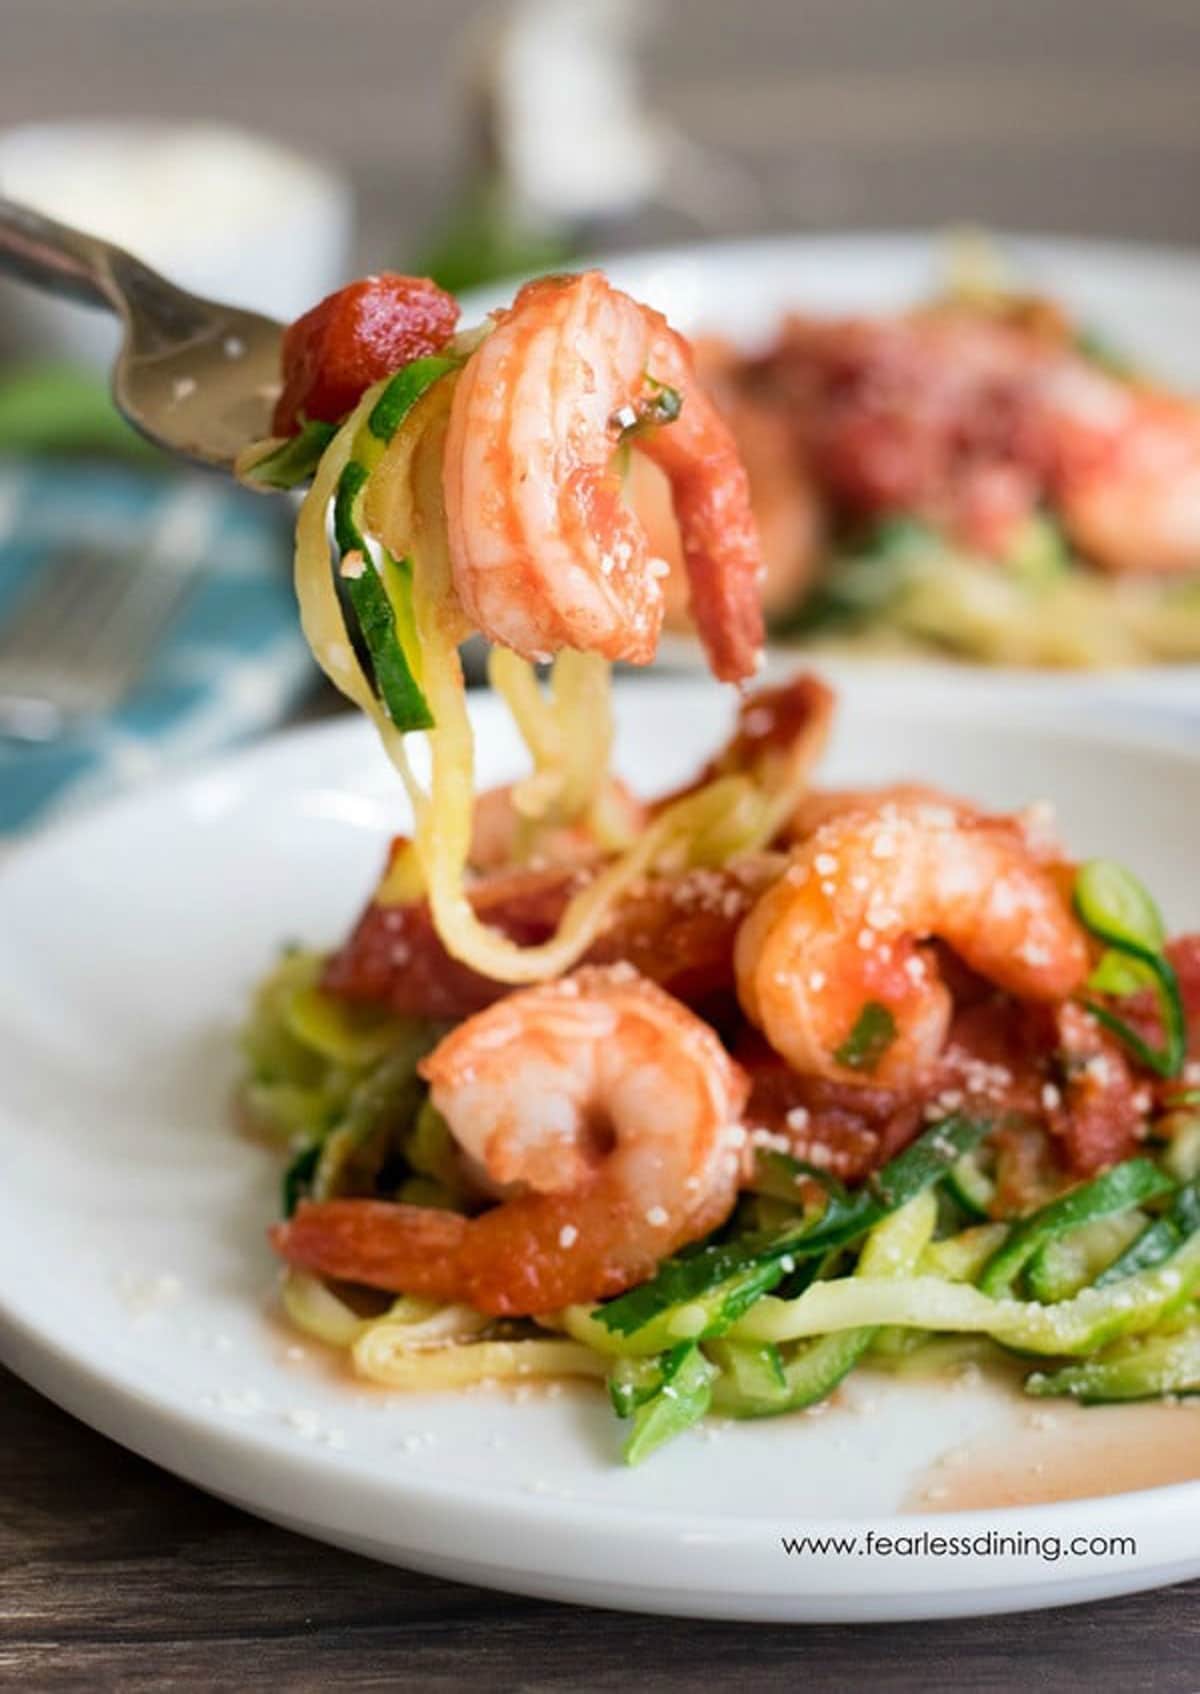 A fork full of zucchini noodles and a cooked shrimp.